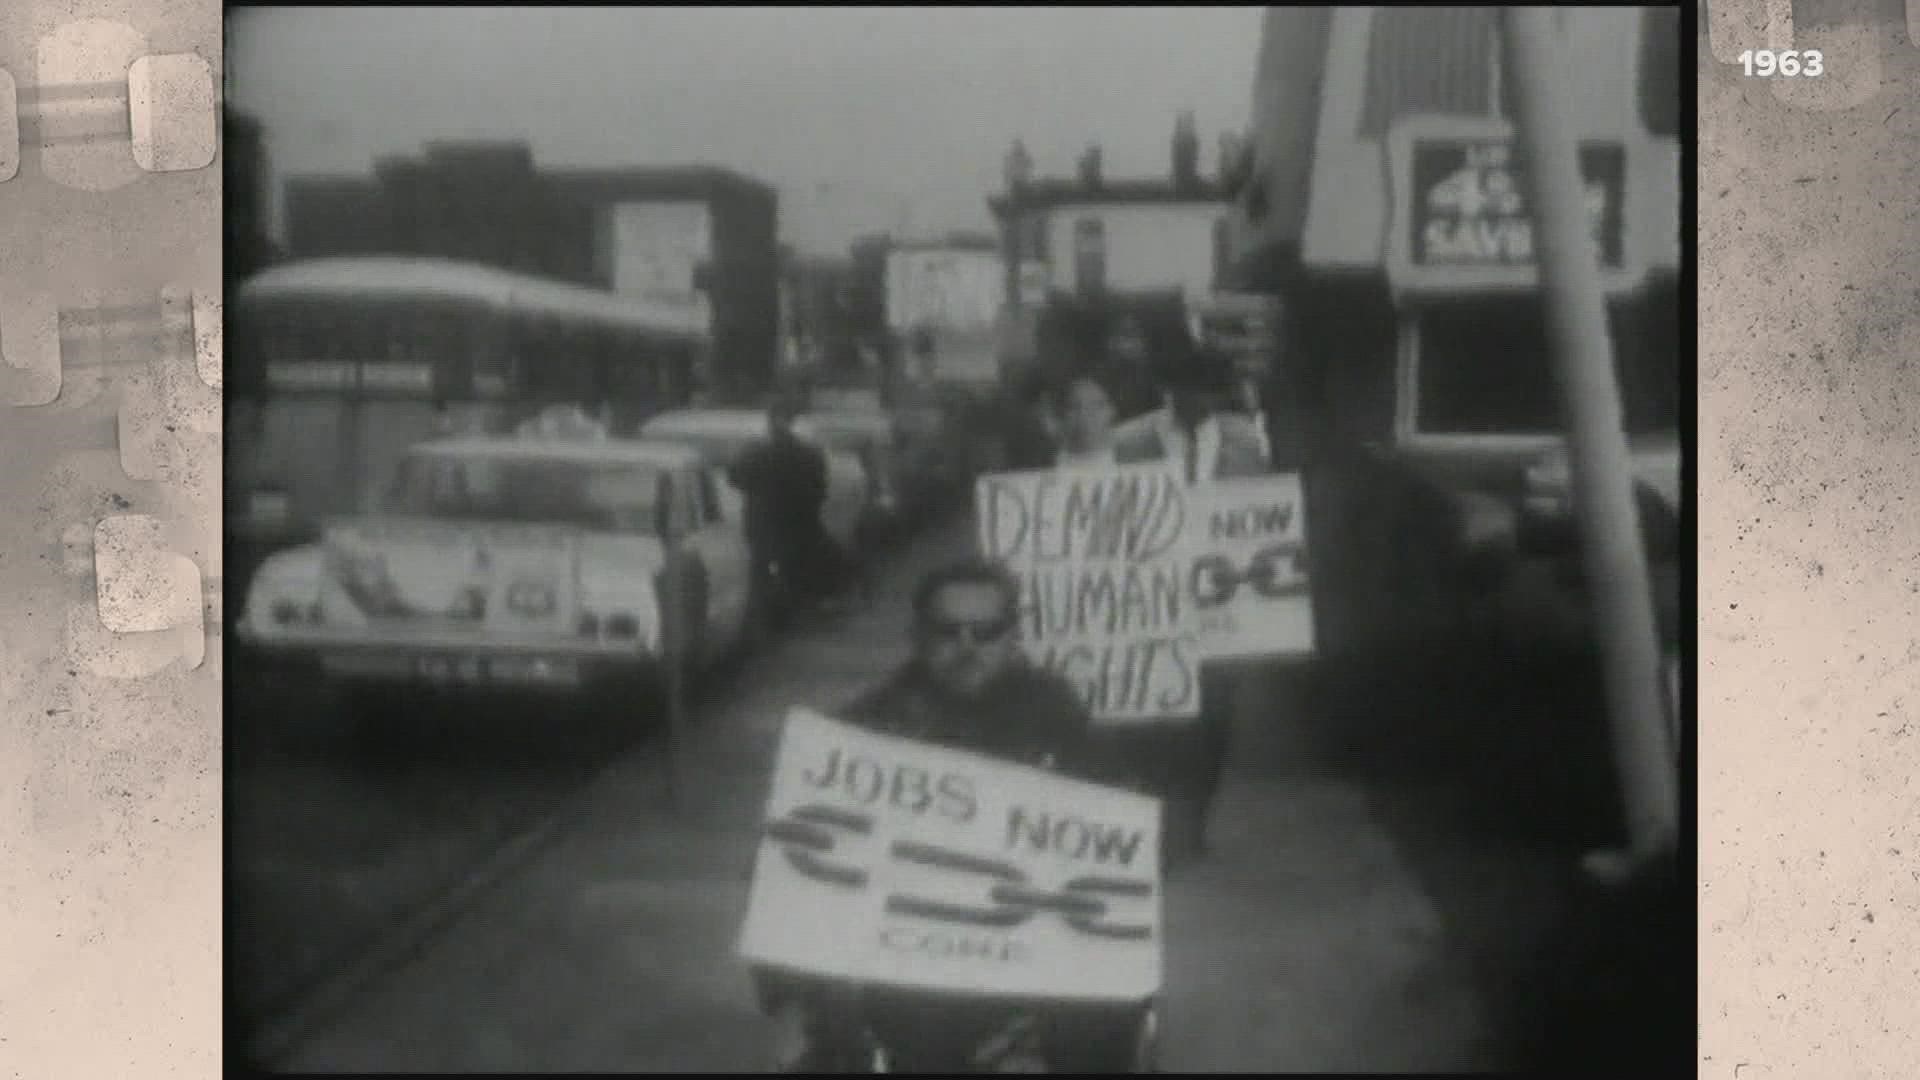 This week's Vintage KSDK goes back to early October 1963, when protestors ramped up demonstrations at Jefferson Bank on Washington Boulevard.